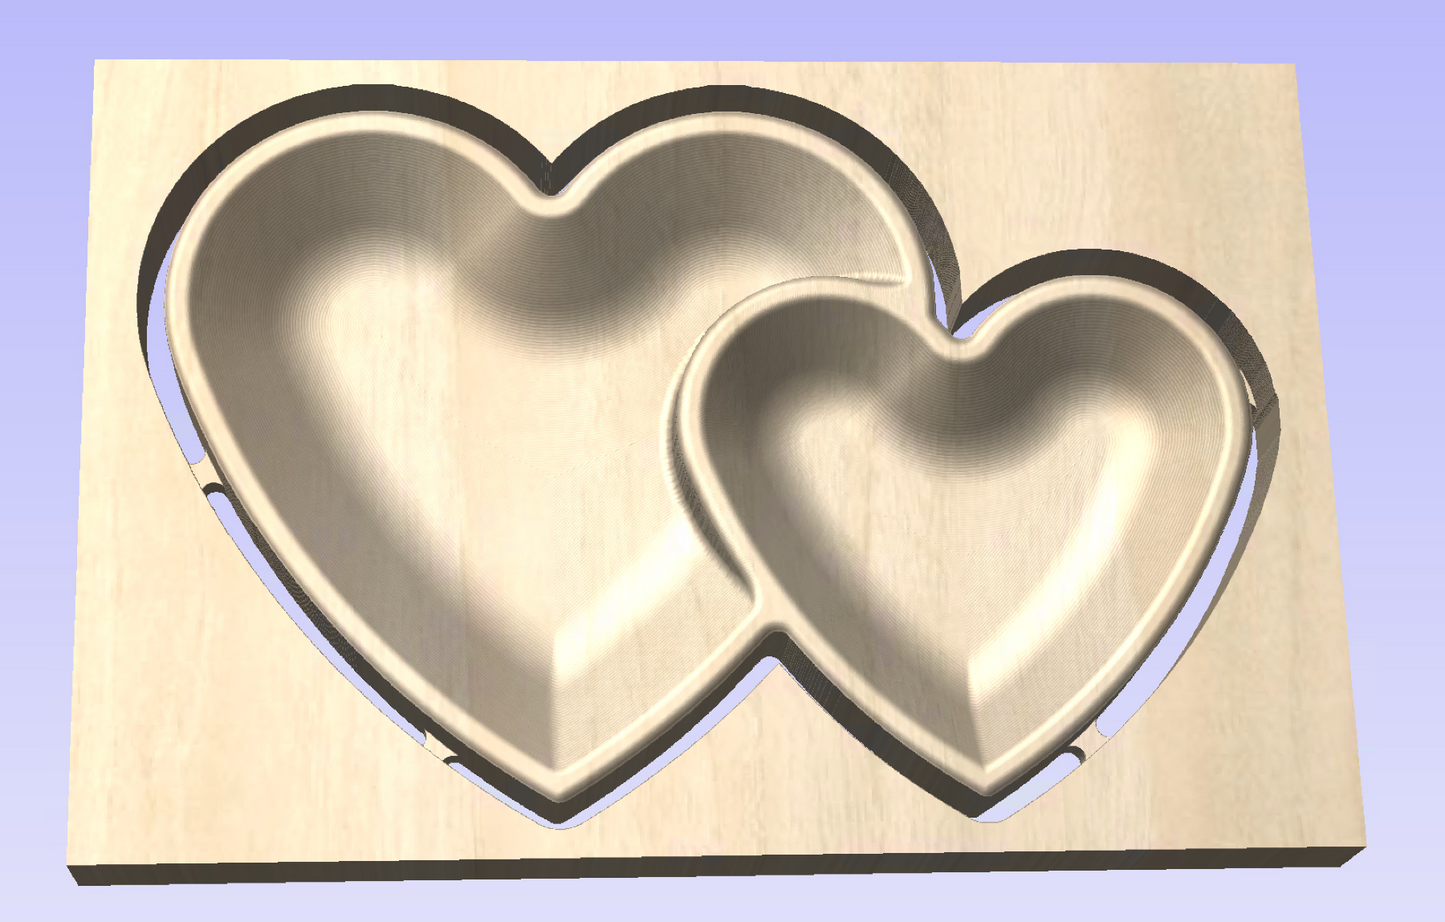 toolpath preview for 2 nested 3d hearts made into 1 tray